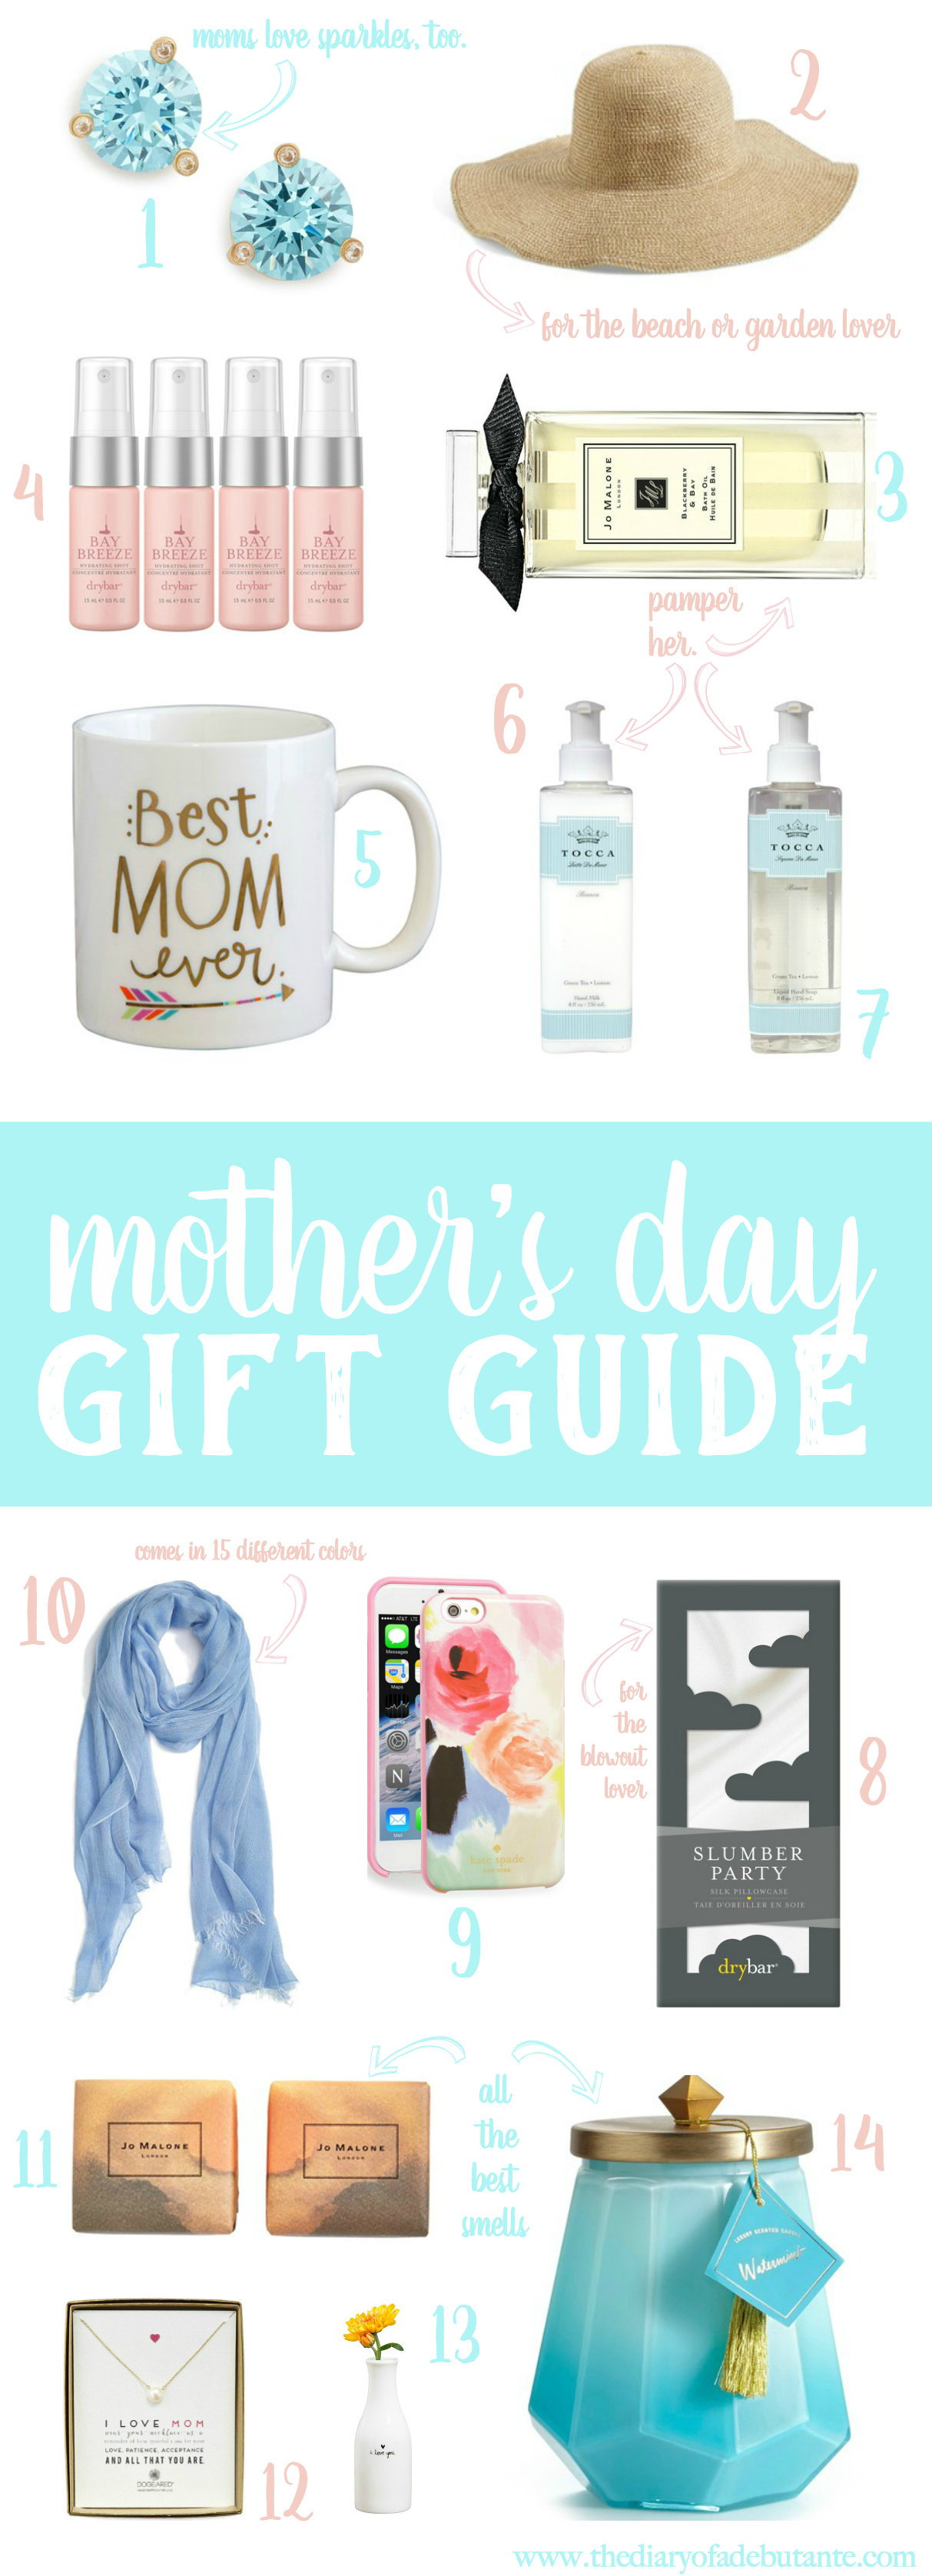 Mother's Day Gift Guide, Mother's Day Gift Ideas, Gifts for Women, Gifts under $50, Stephanie Ziajka, Diary of a Debutante